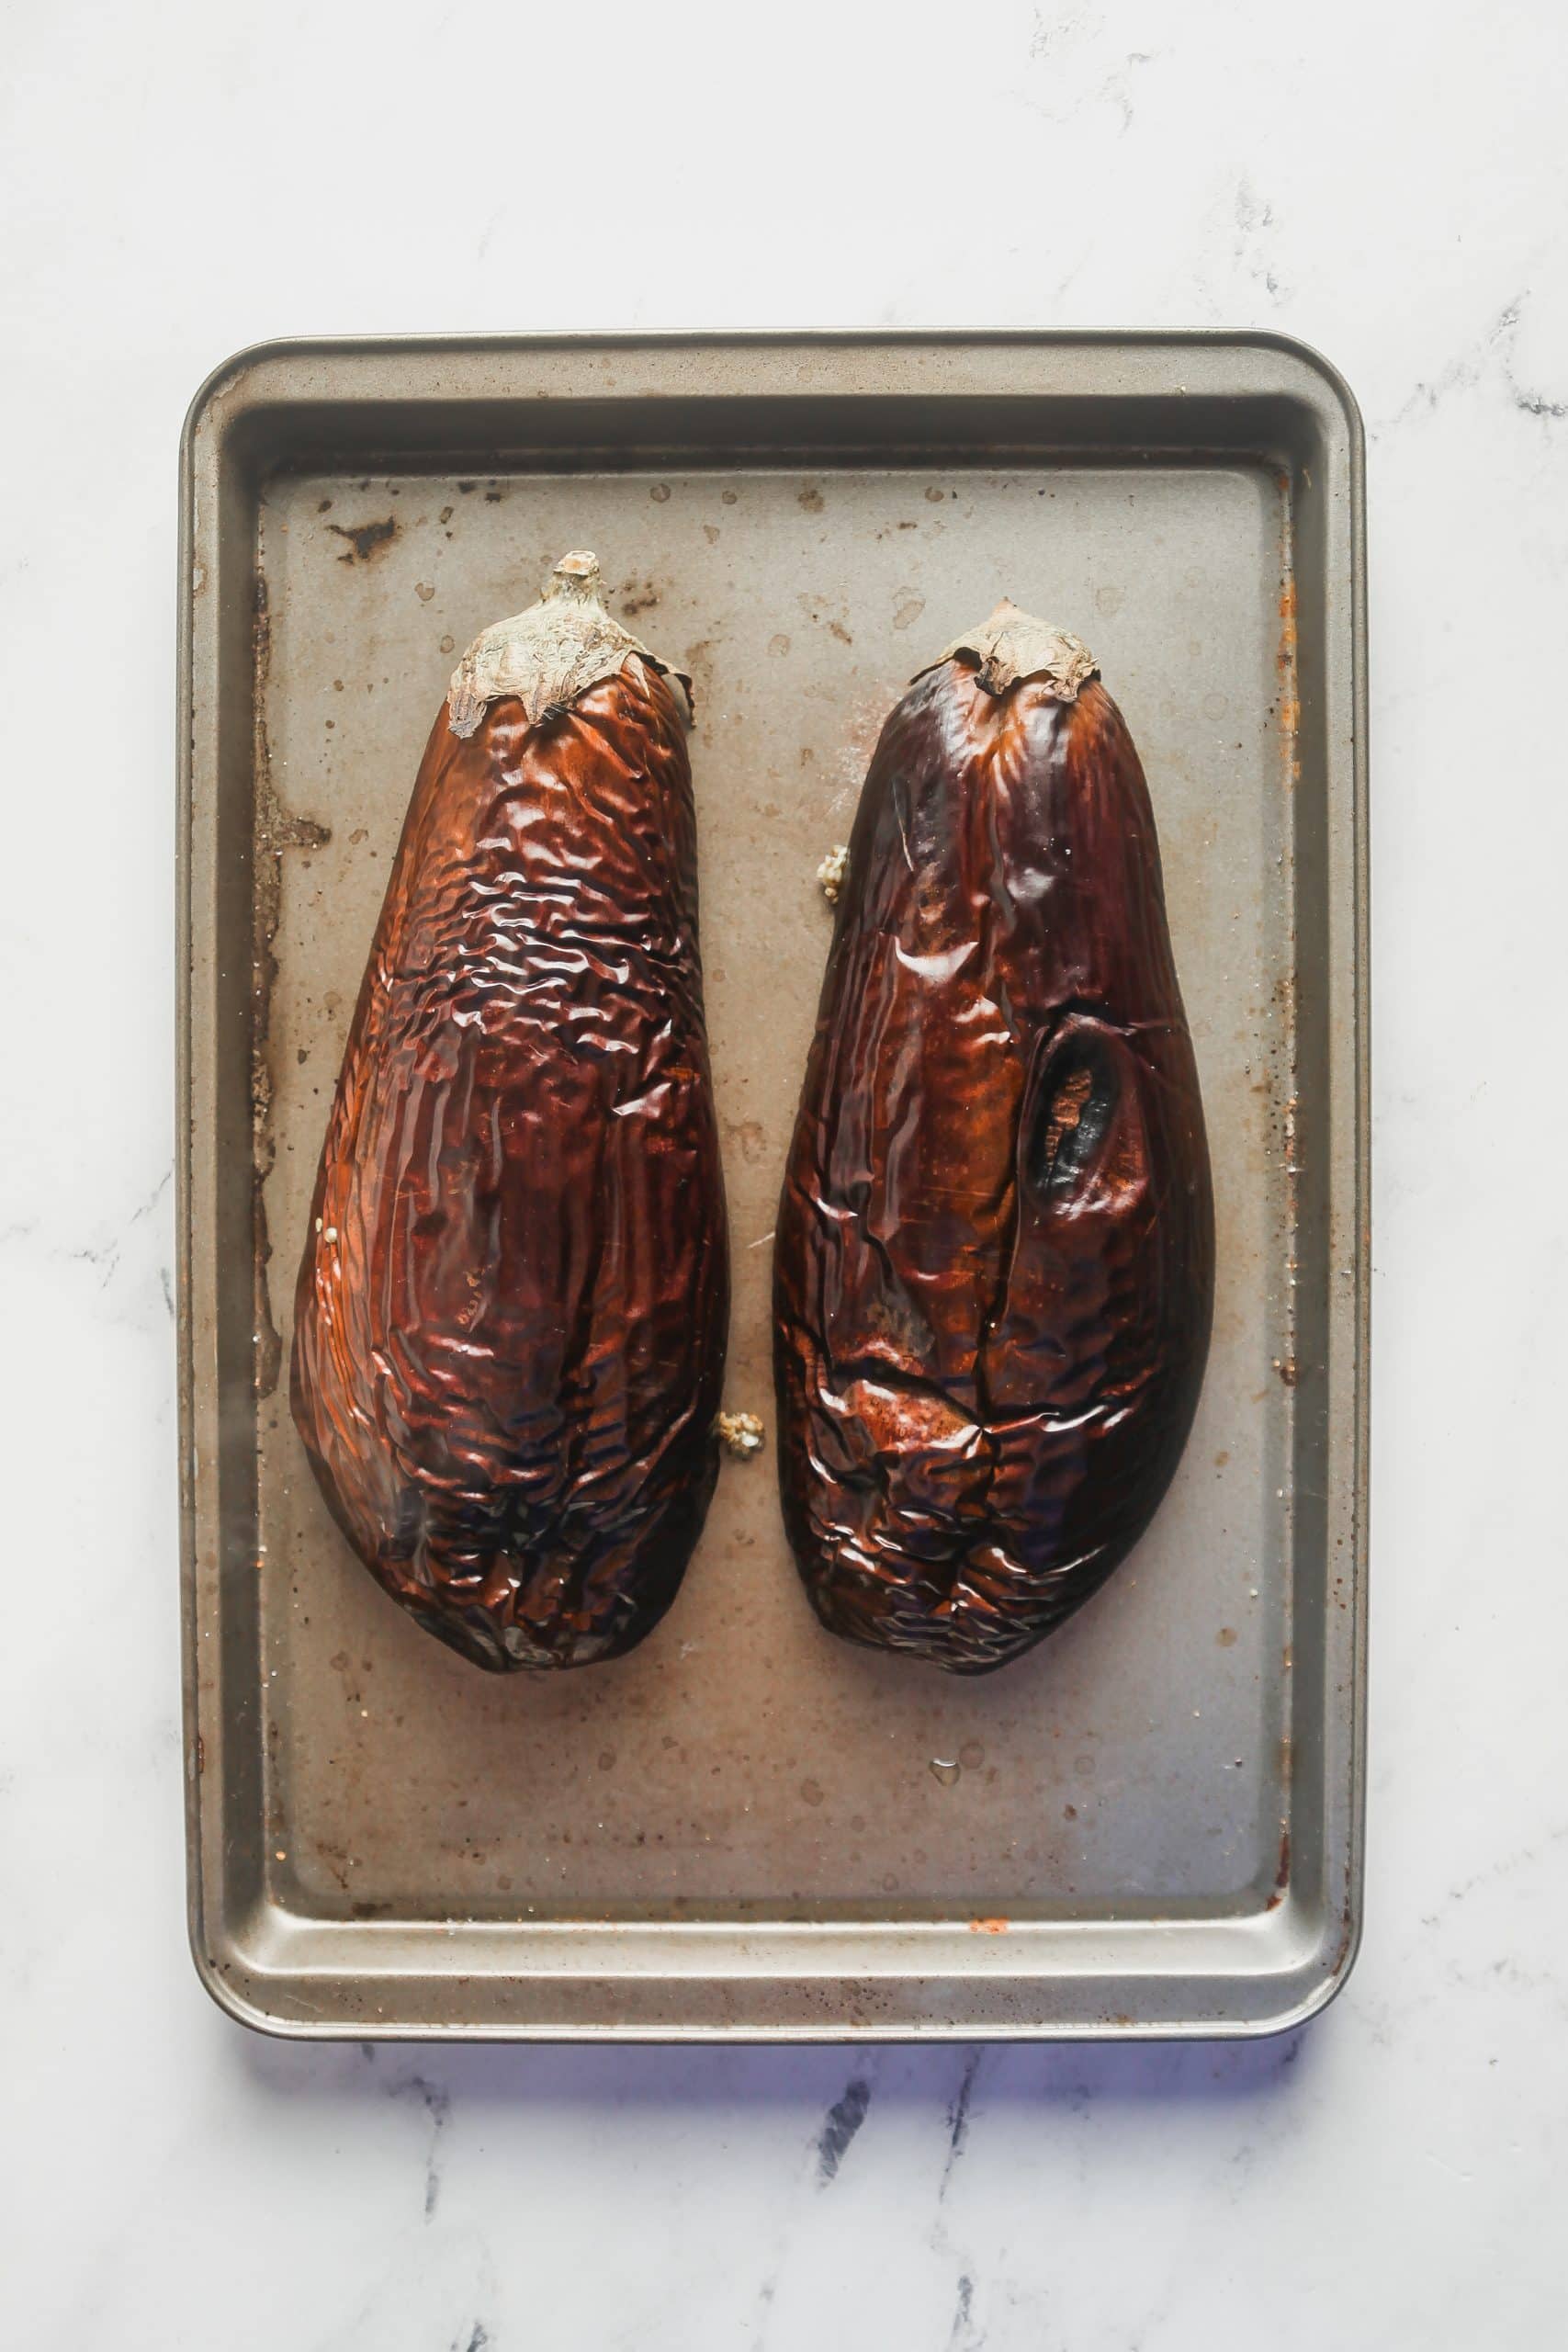 After the eggplant is charred. 